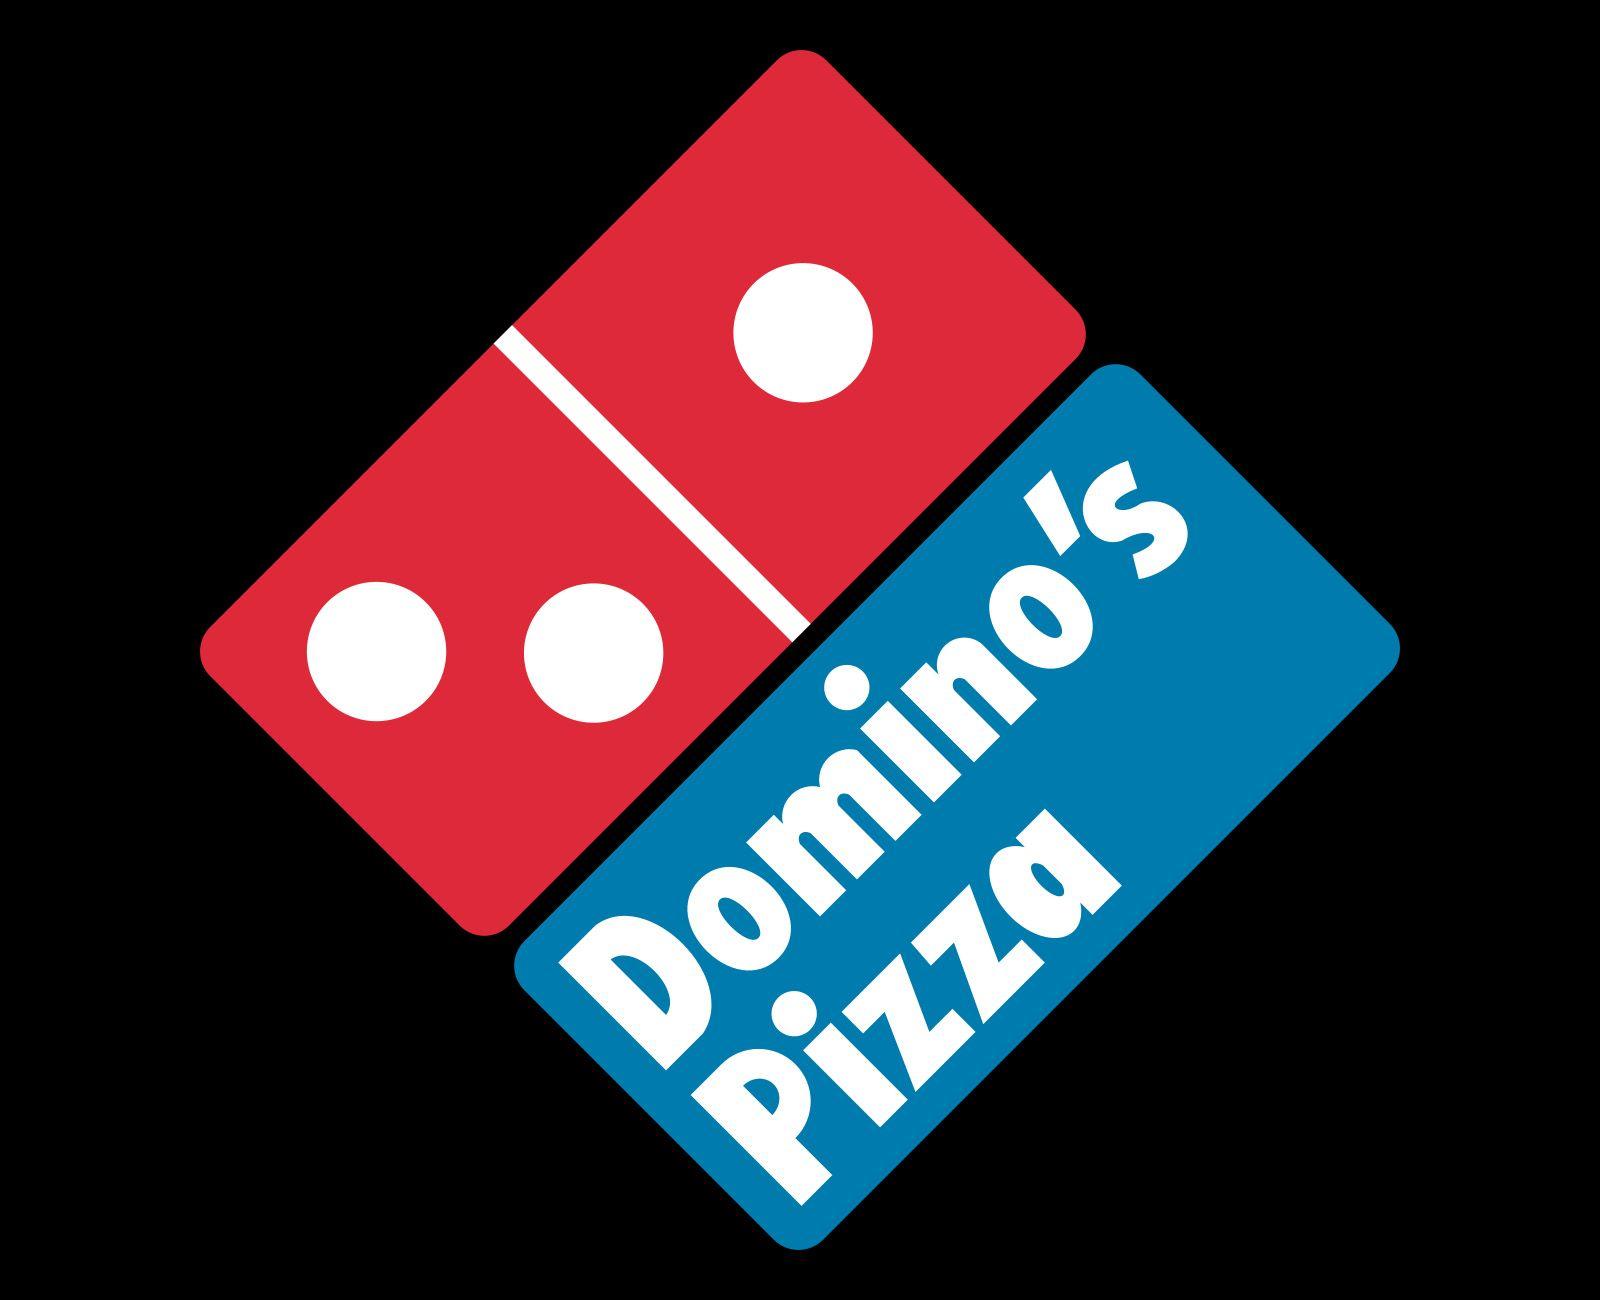 Domino's Old Logo - Domino's Logo, Domino's Symbol, Meaning, History and Evolution